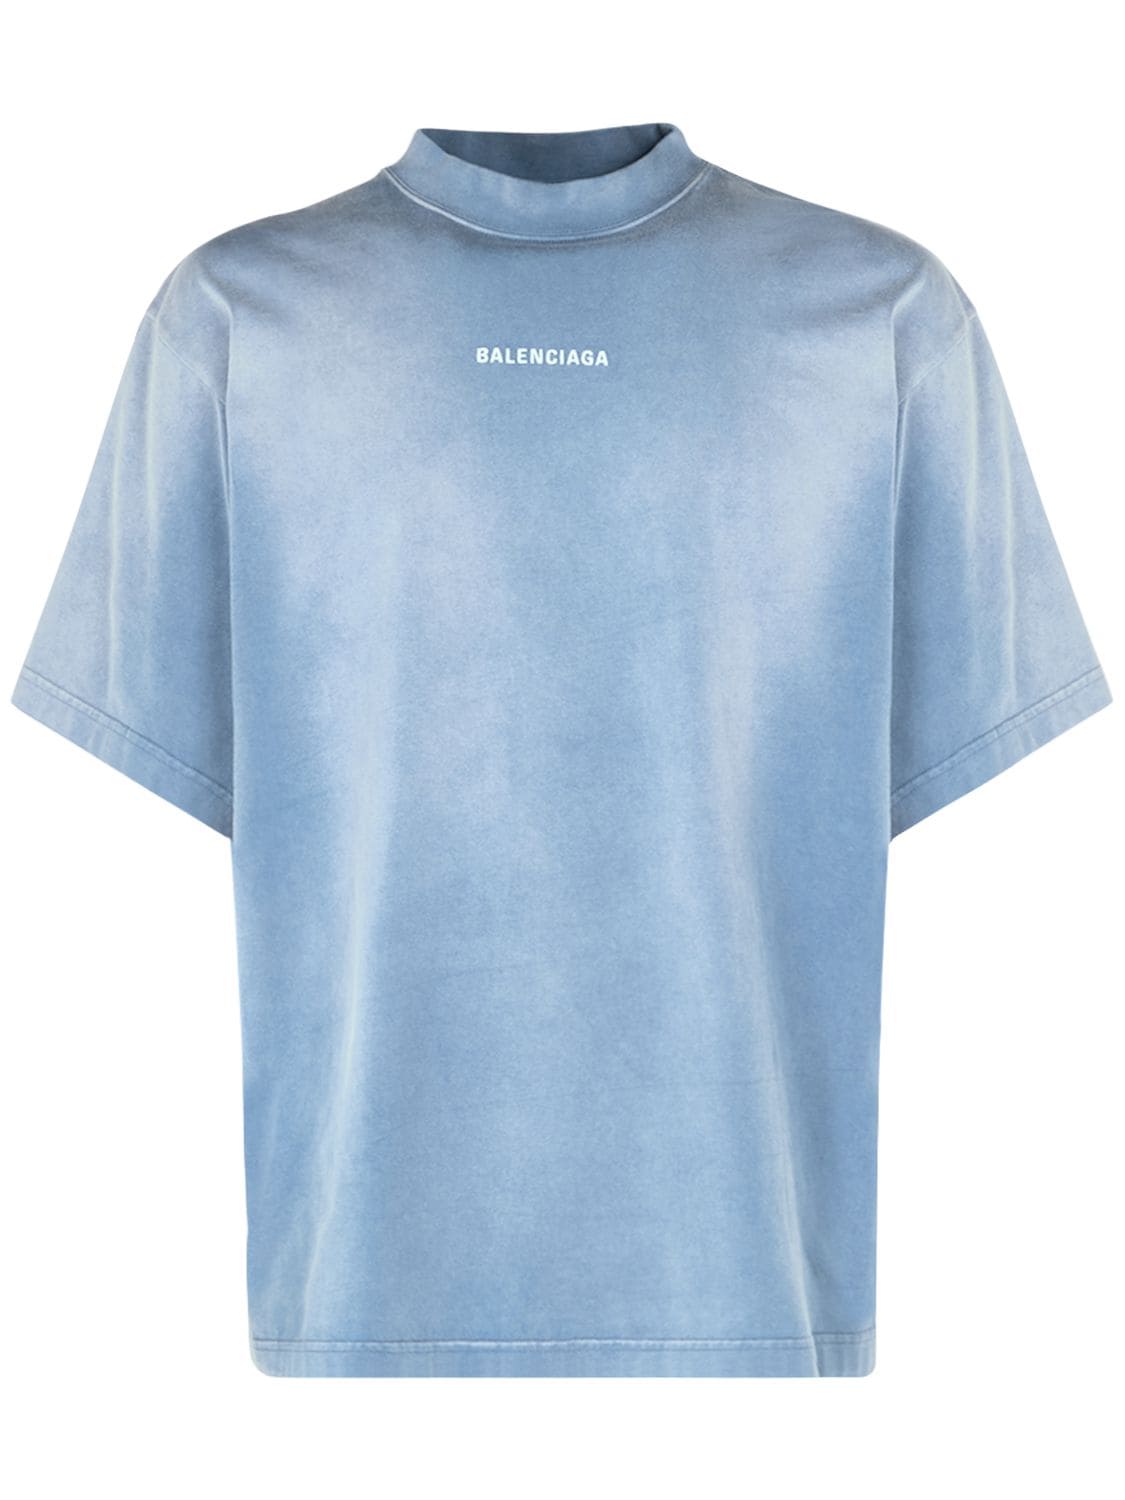 Balenciaga Embroidered Cotton Jersey T-shirt In Washed Blue